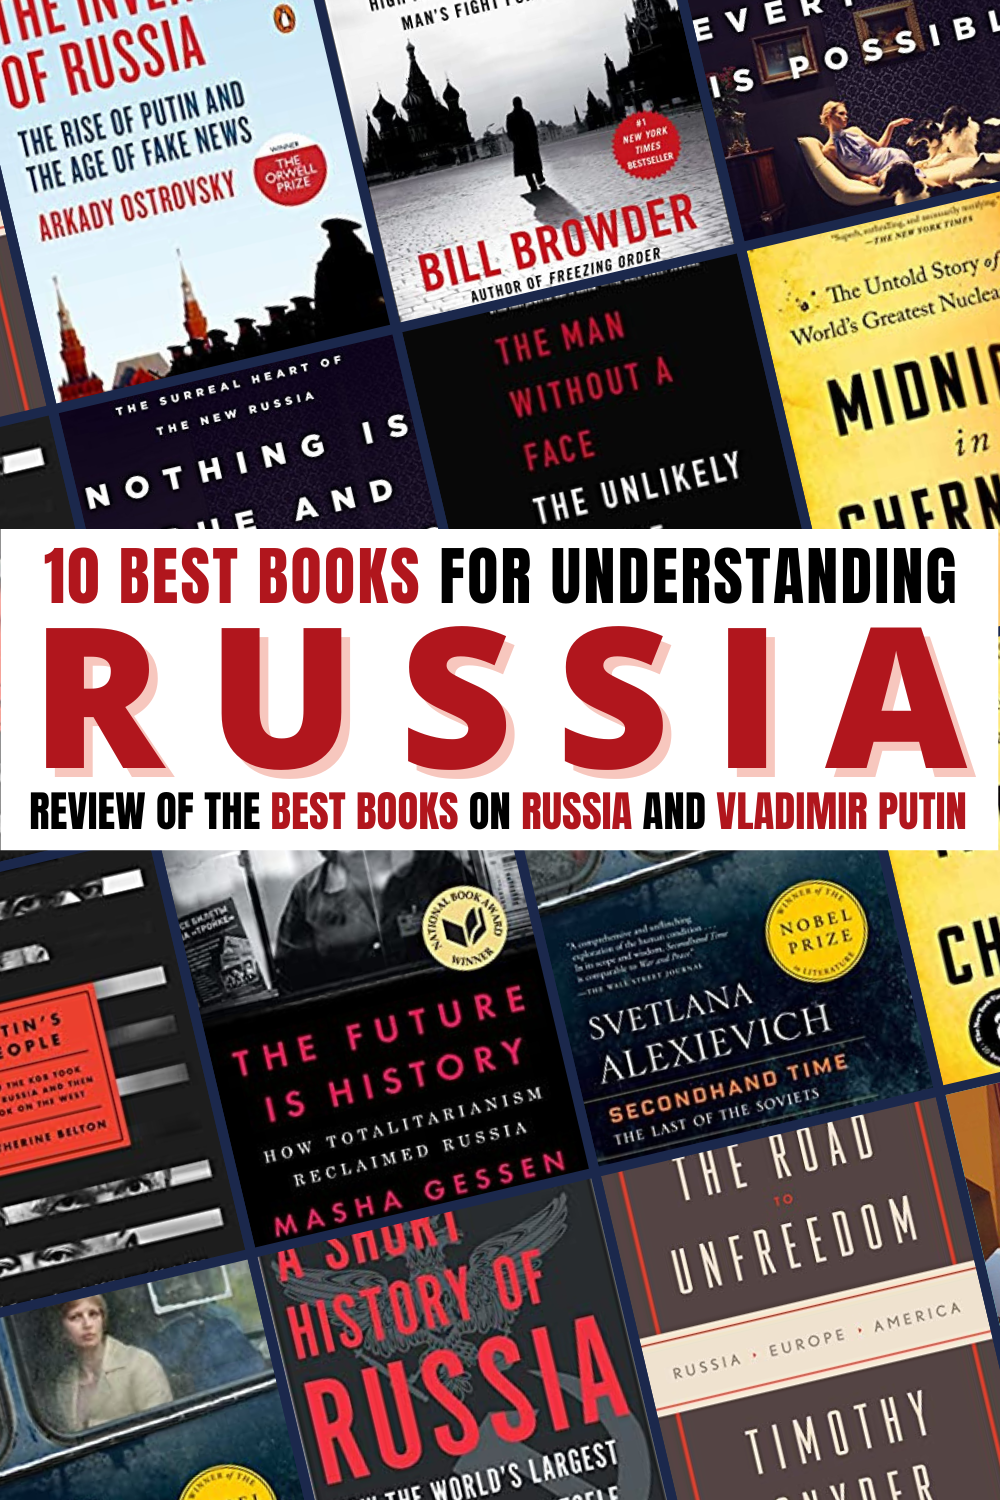 1 list of 10 books on Russia